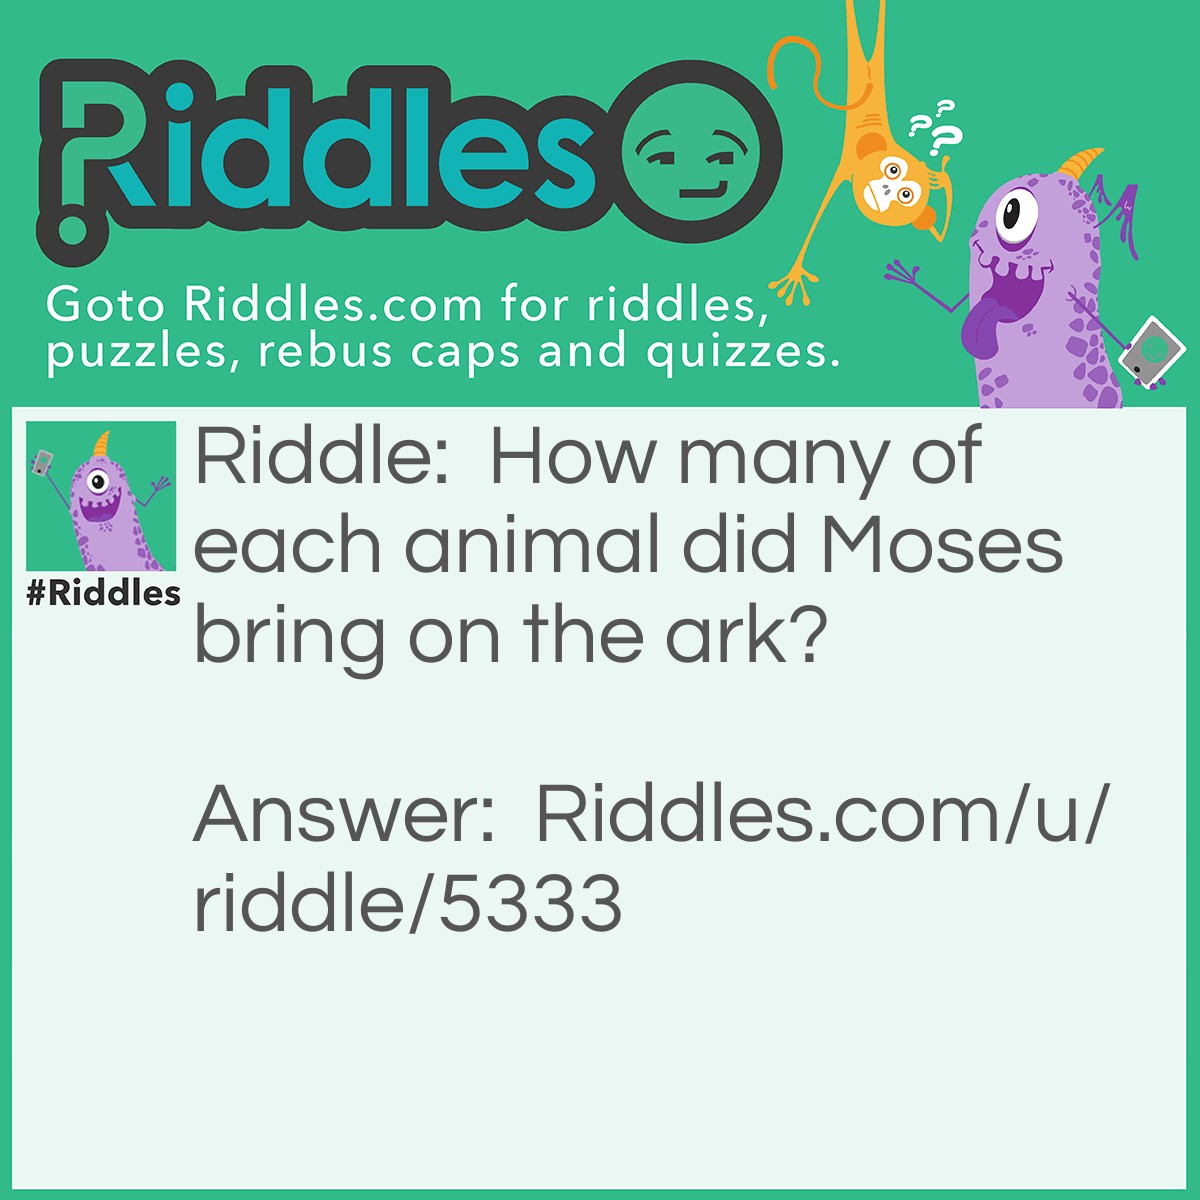 Riddle: How many of each animal did Moses bring on the ark? Answer: None, Moses wasn't on the ark, Noah was.